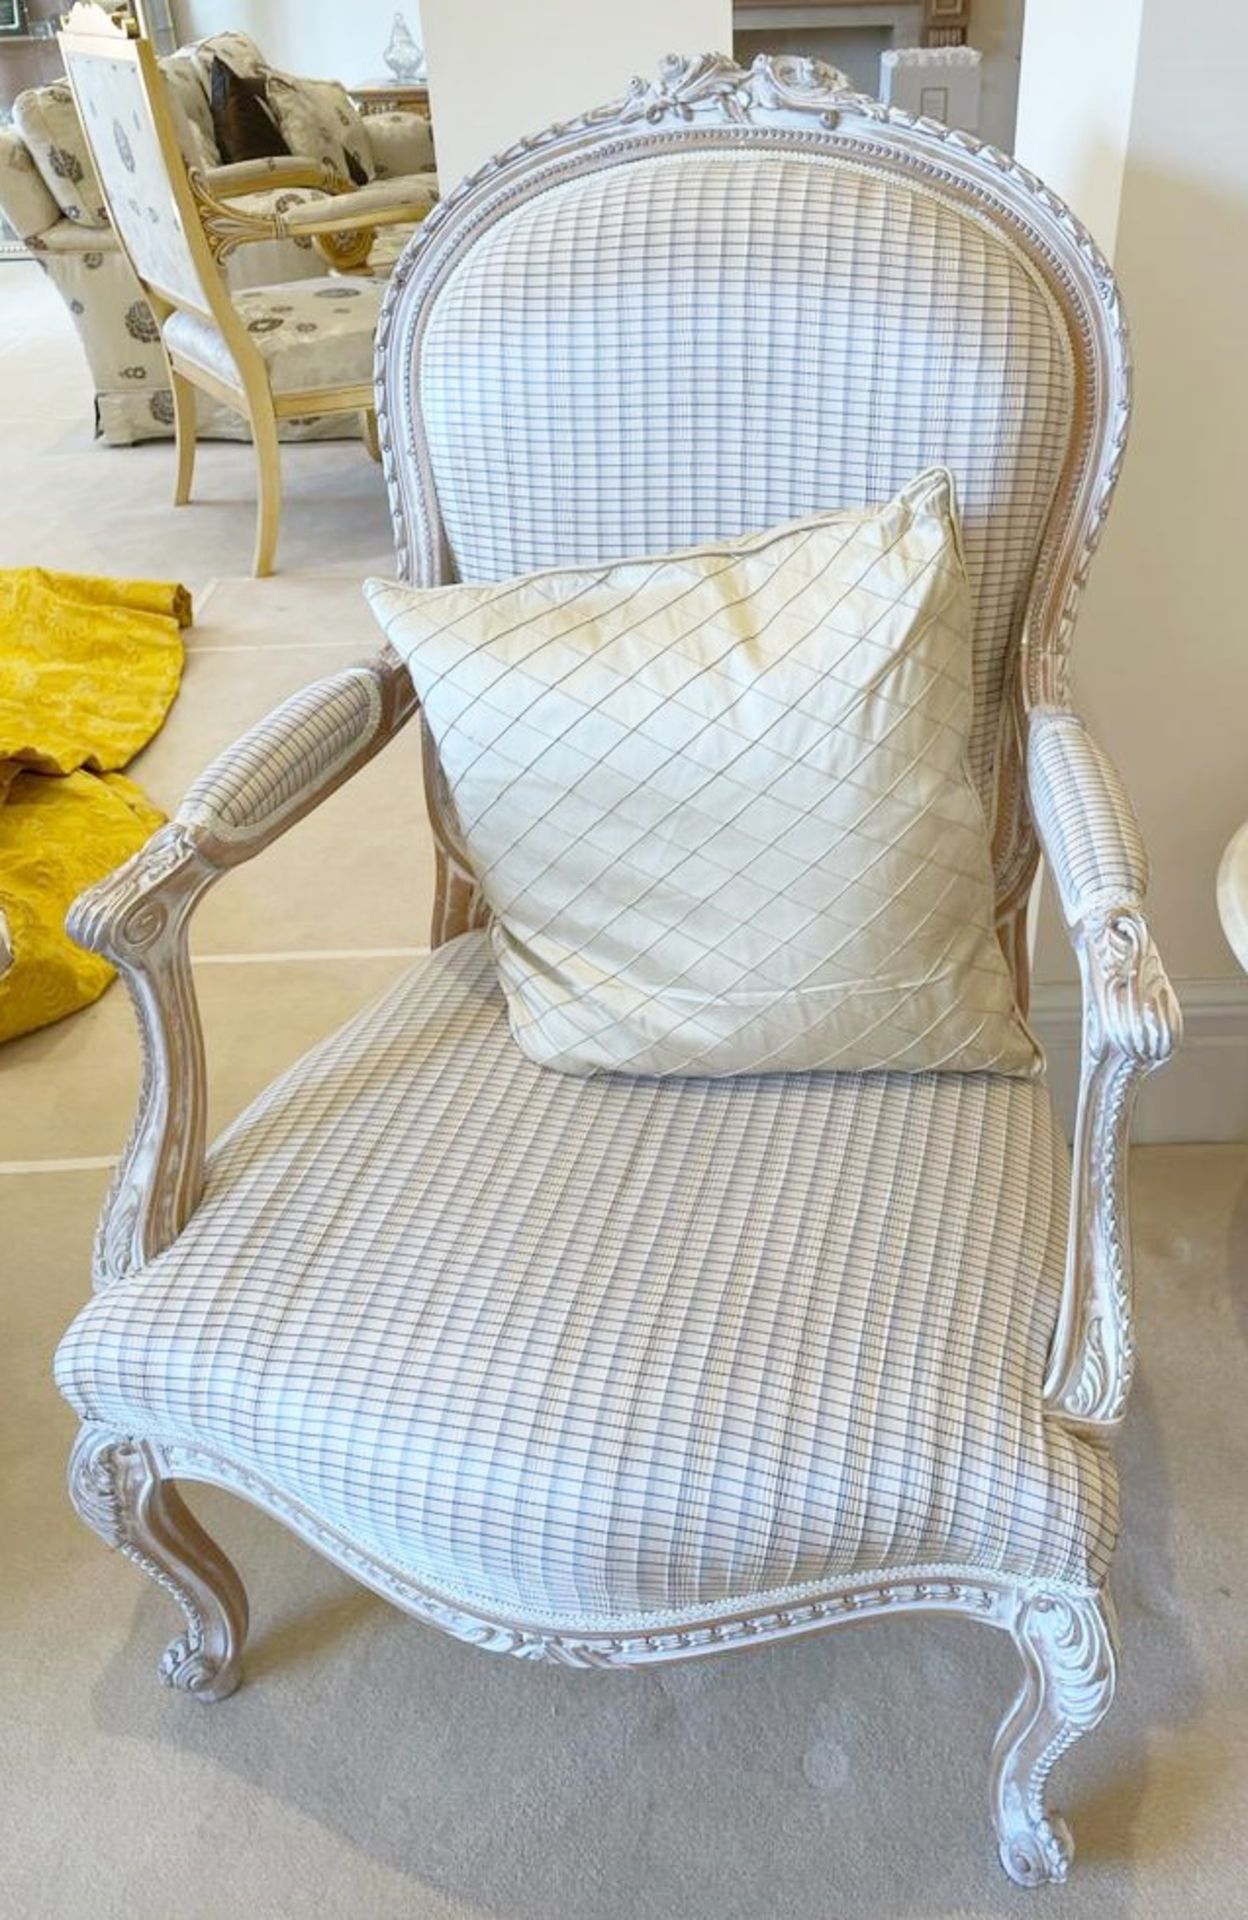 Pair of French Shabby Chic Bedroom Chairs - Stunning Carved Wood Chair Upholstered With Striped - Image 10 of 16